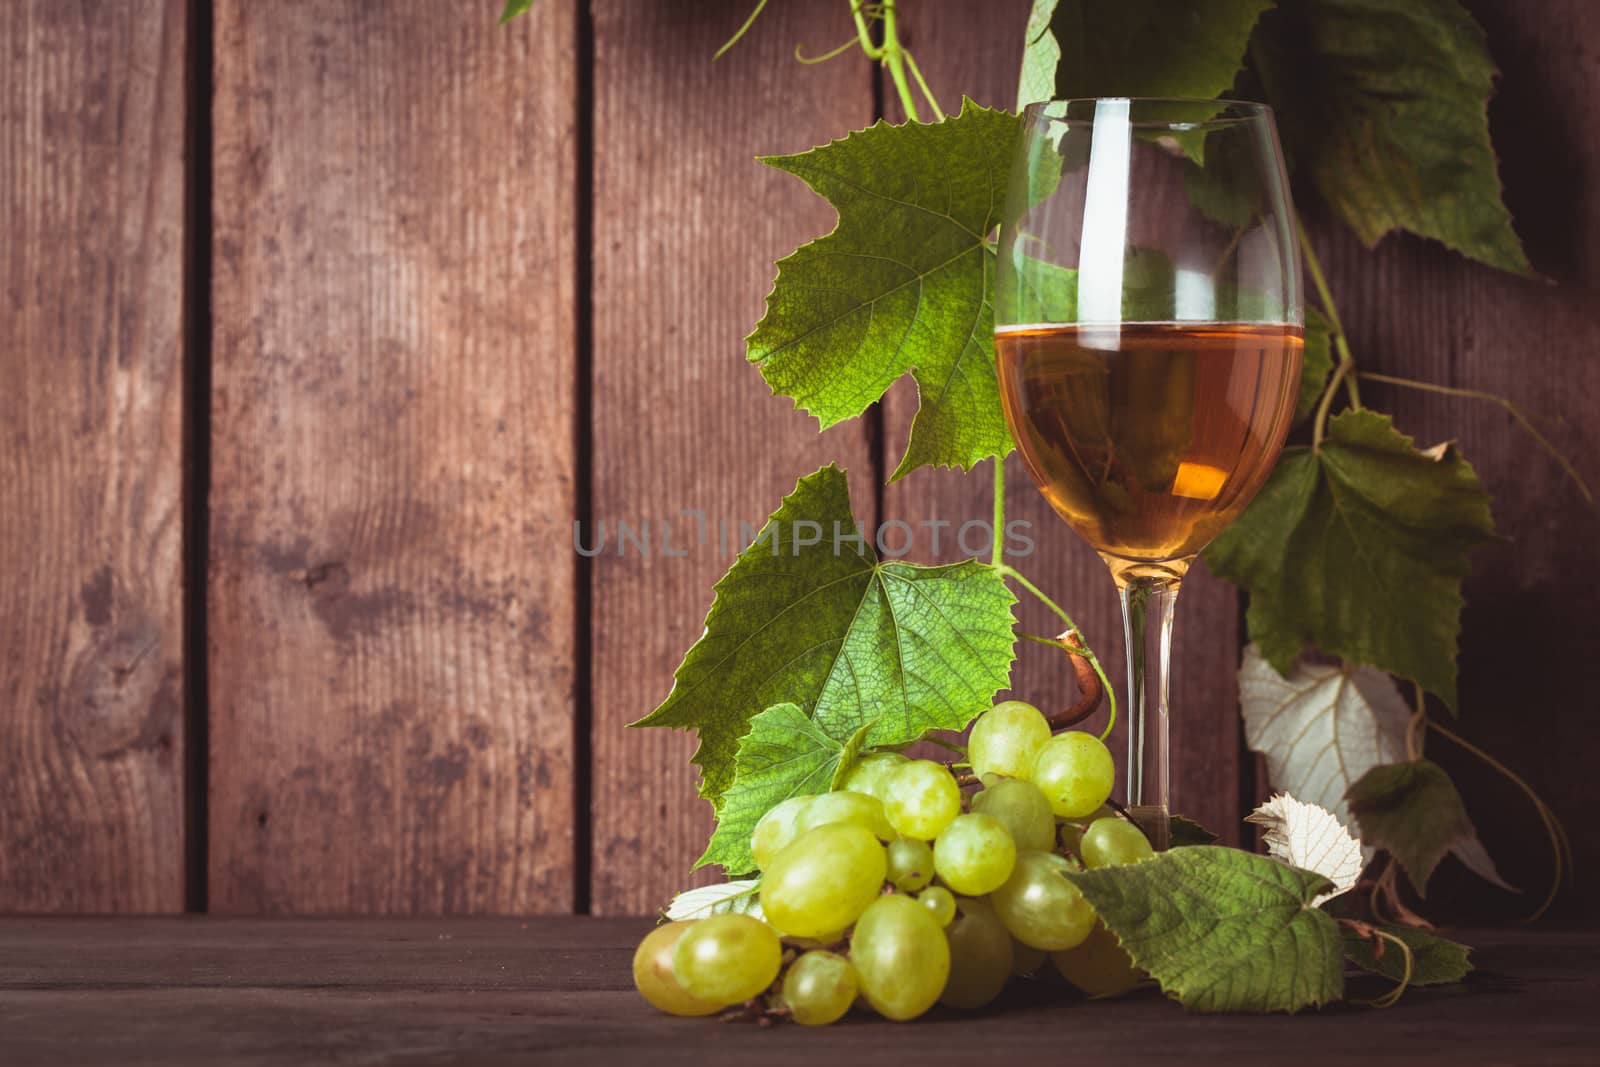 Grapes with leaves by oksix